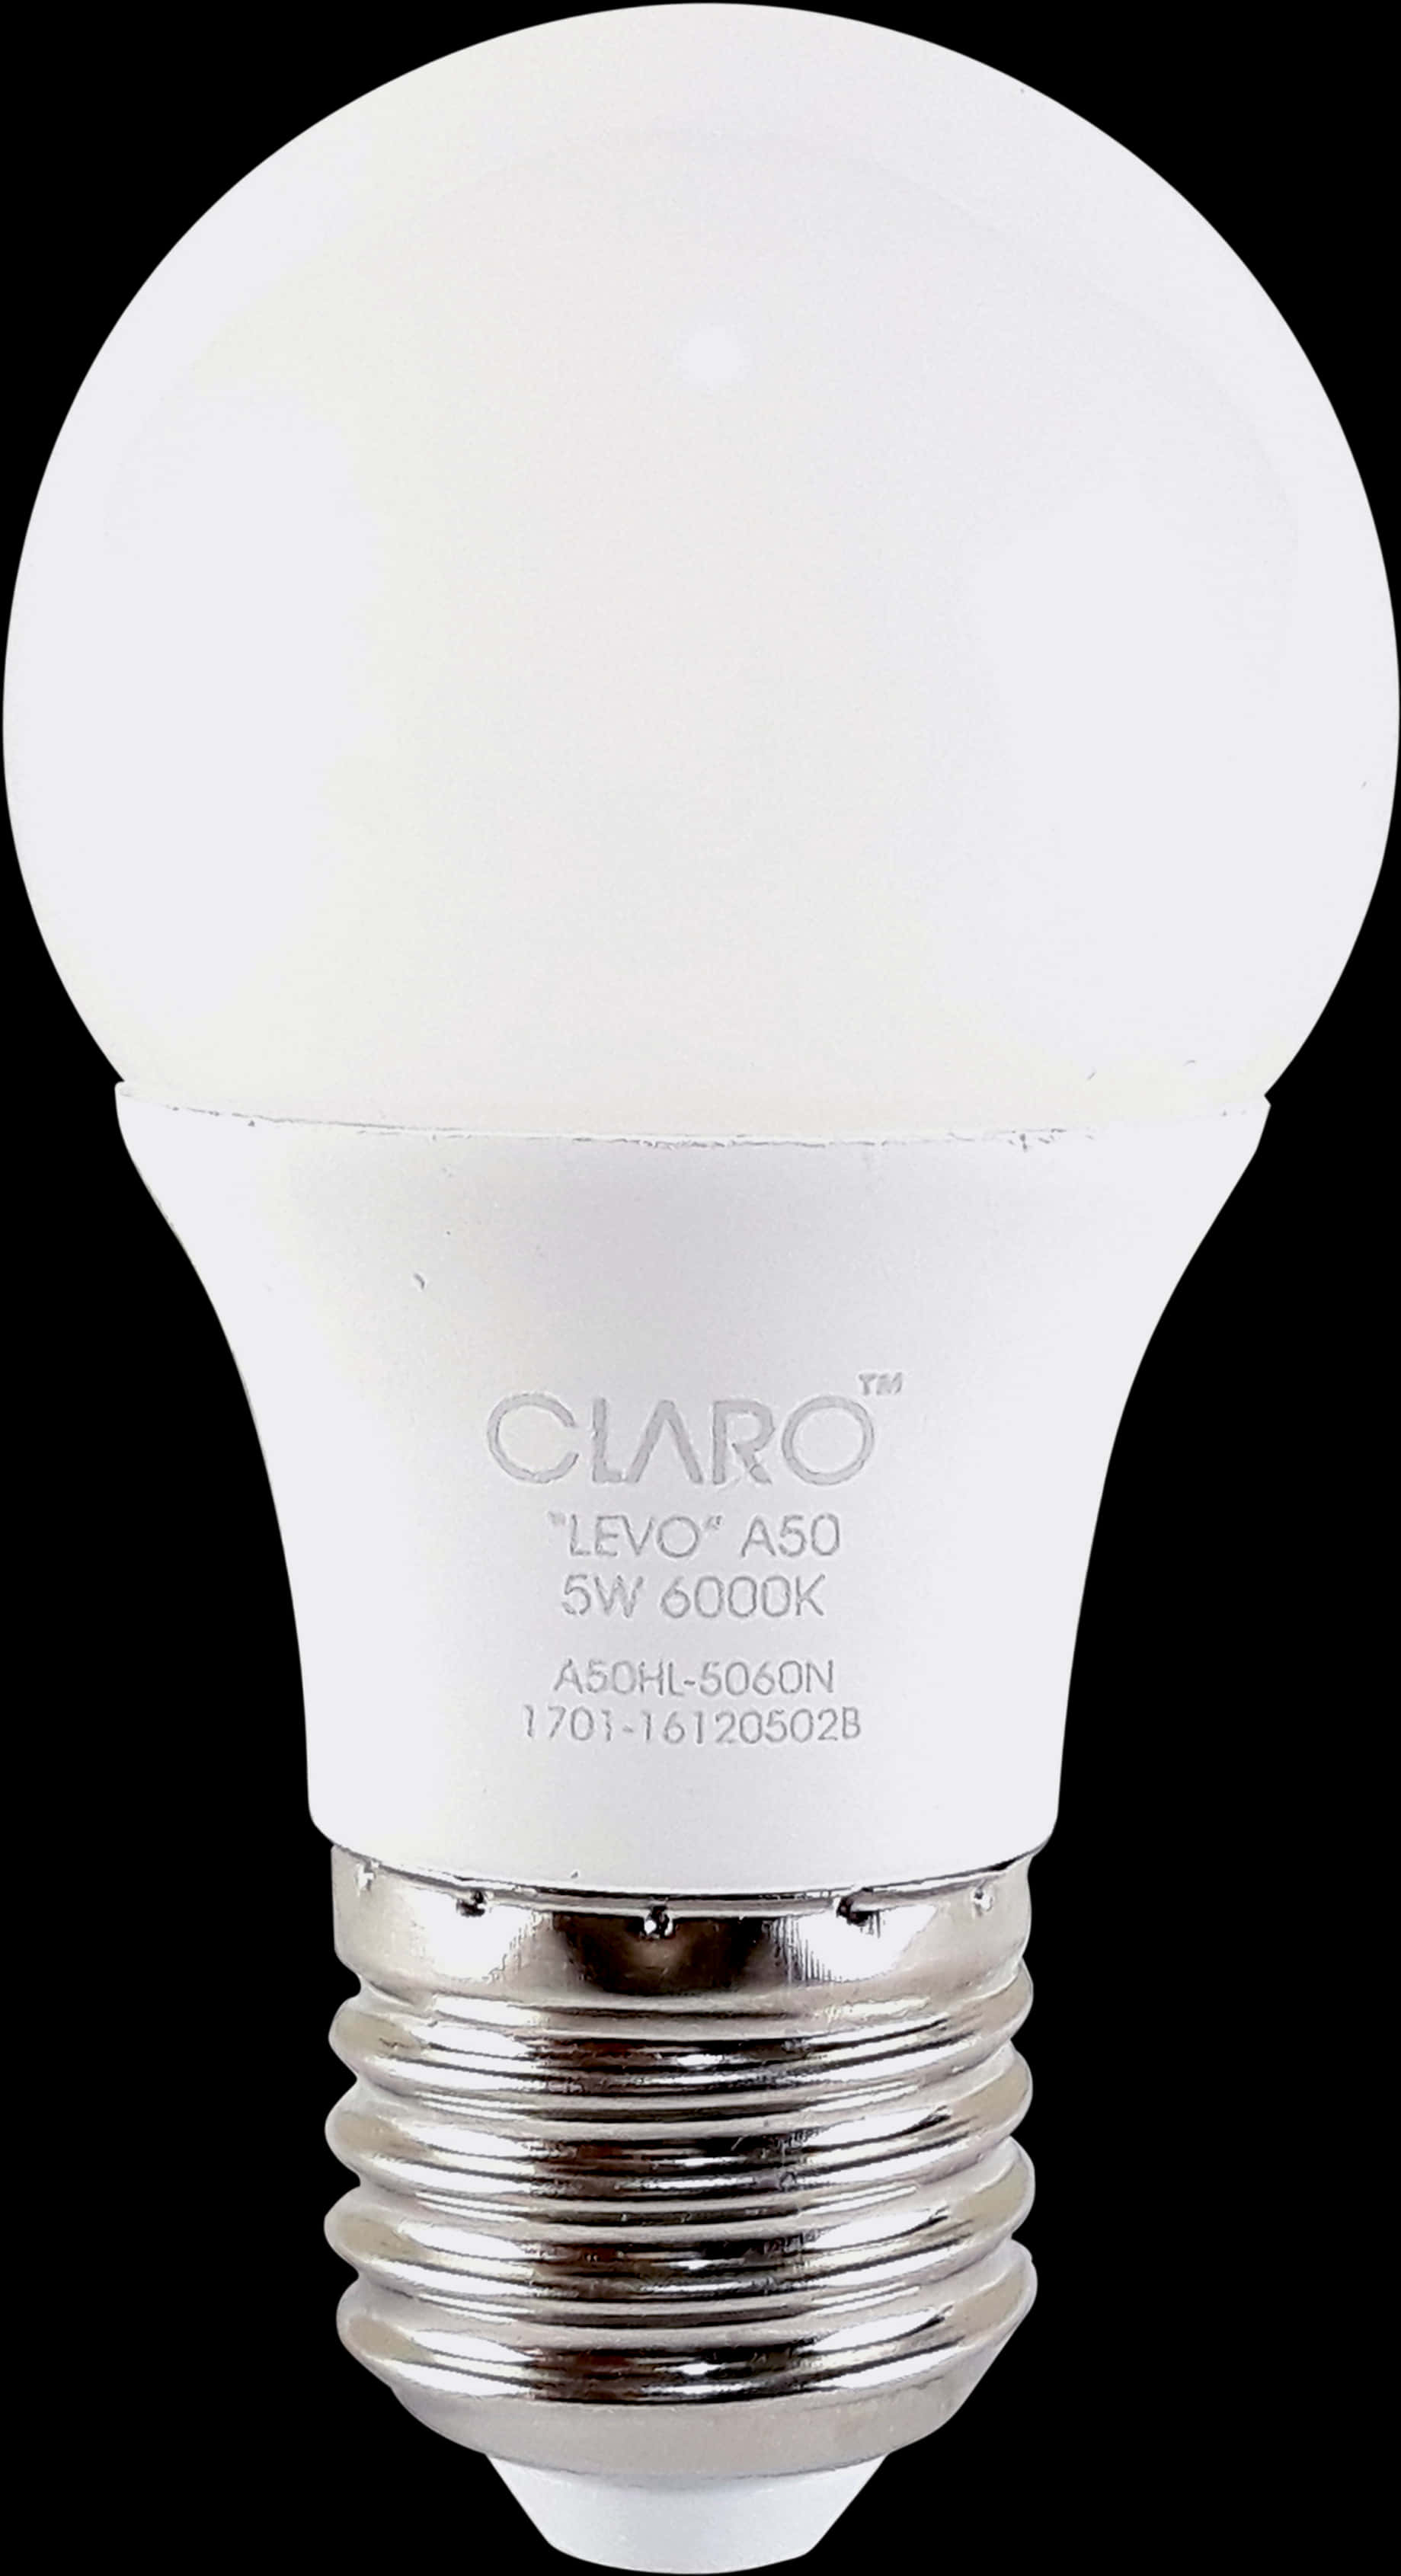 A White Light Bulb With A Silver Rim